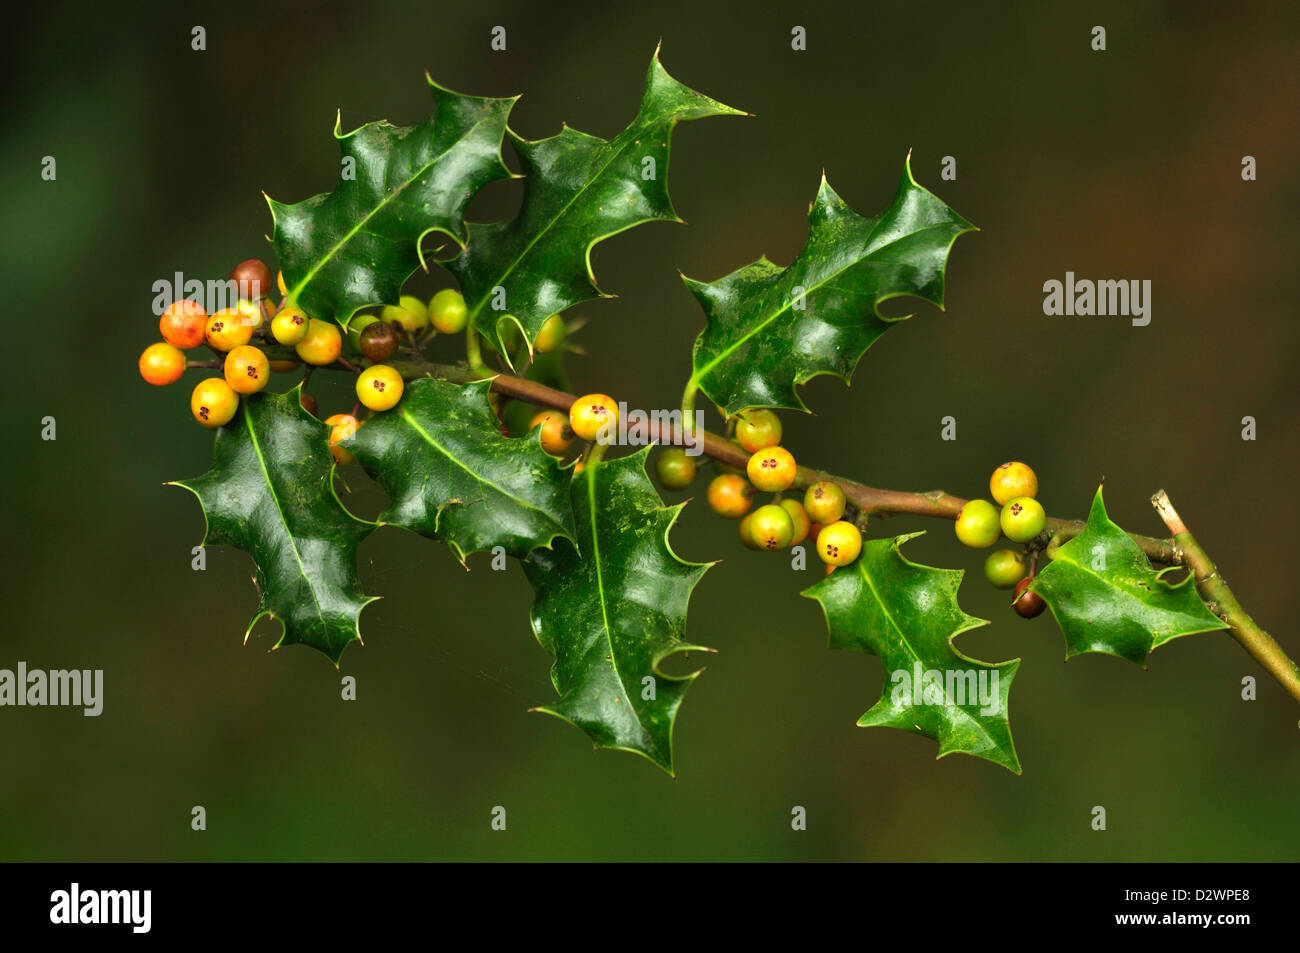 Ripening berries of holly Stock Photo